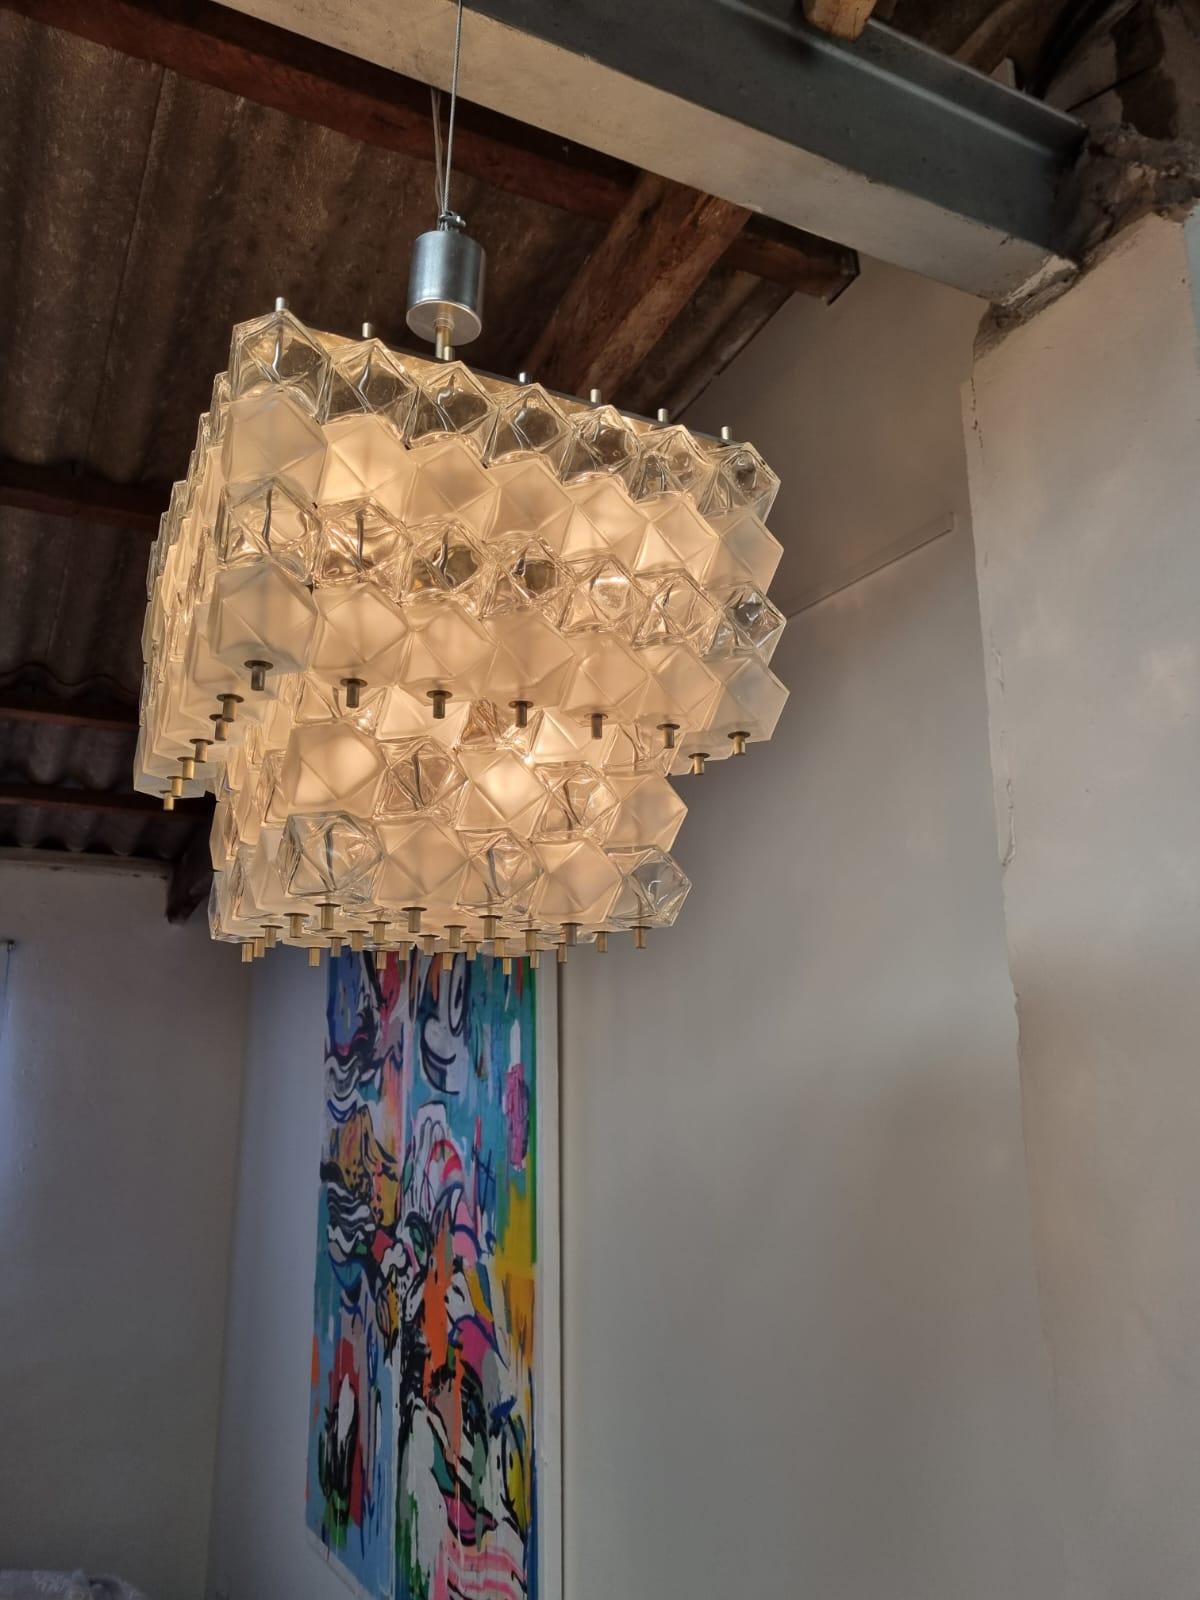 Chandelier by Venini Poliedri, Italy, around the 1950s. Beautiful ceiling lamp with white faceted glass and crystal
It gives an ice crystal aspect which gives it a special characteristic, a very heavy lamp. Measurements: 42 cm x 42 cm x 42 cm